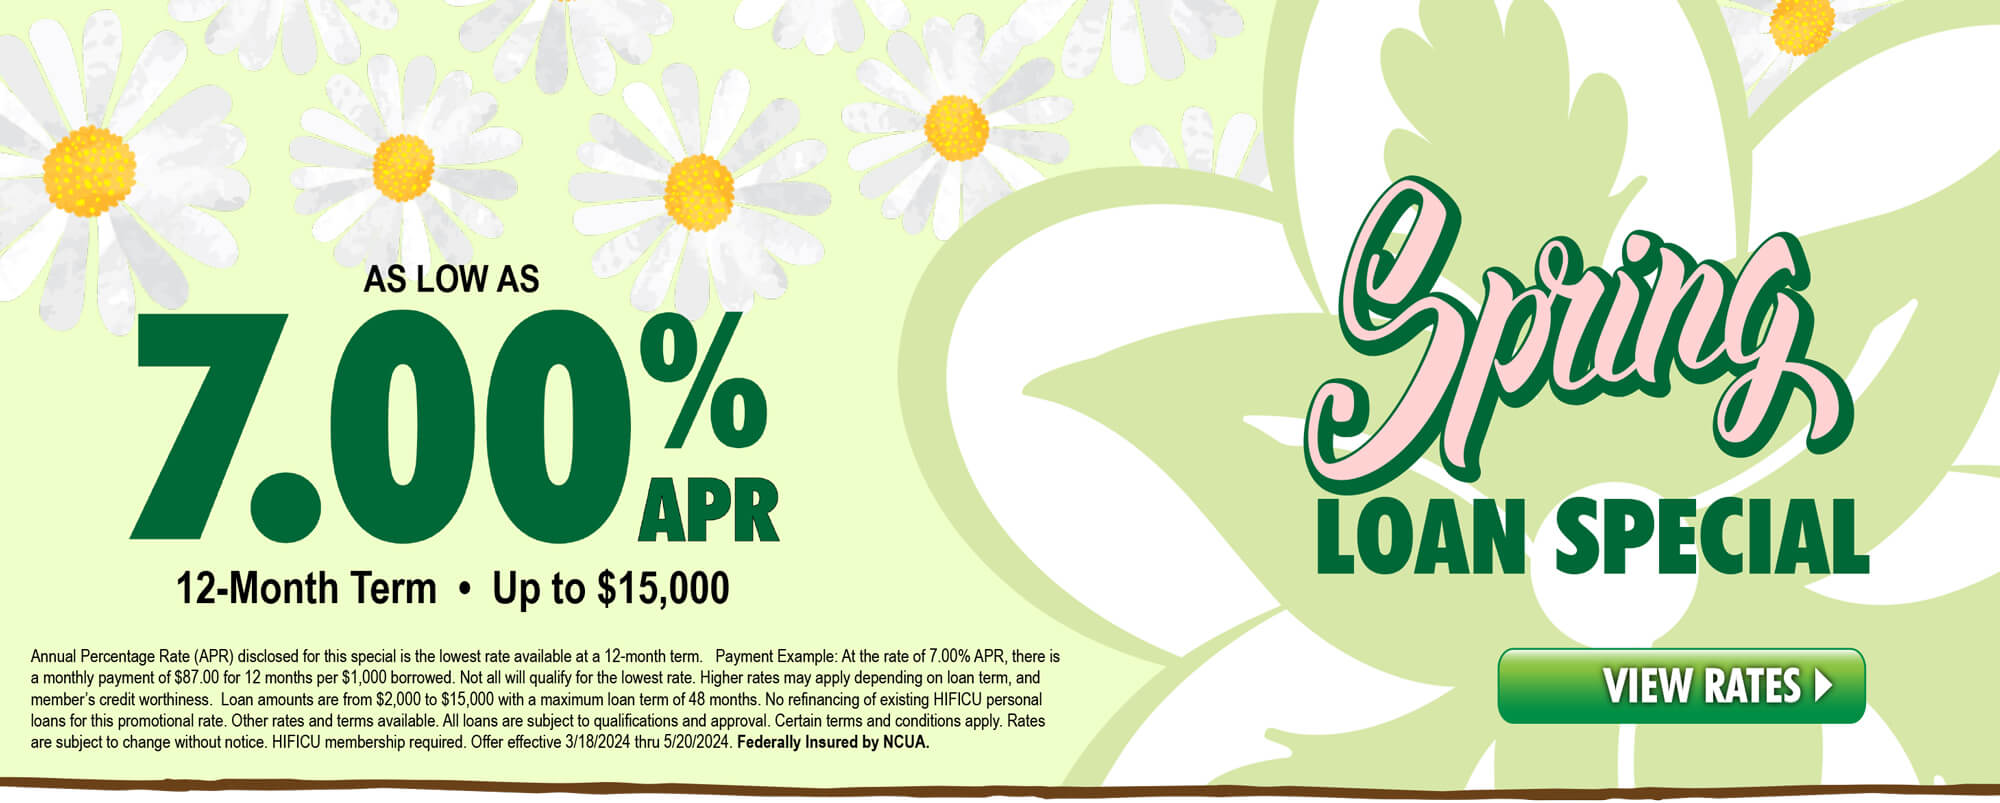 Spring Loan Special - As low as 7.00% APR for a 12-month term, up to $15,000.  Other rates and terms available.  Offer good from 3/18/2024 thru 5/20/2024.Click for more info.